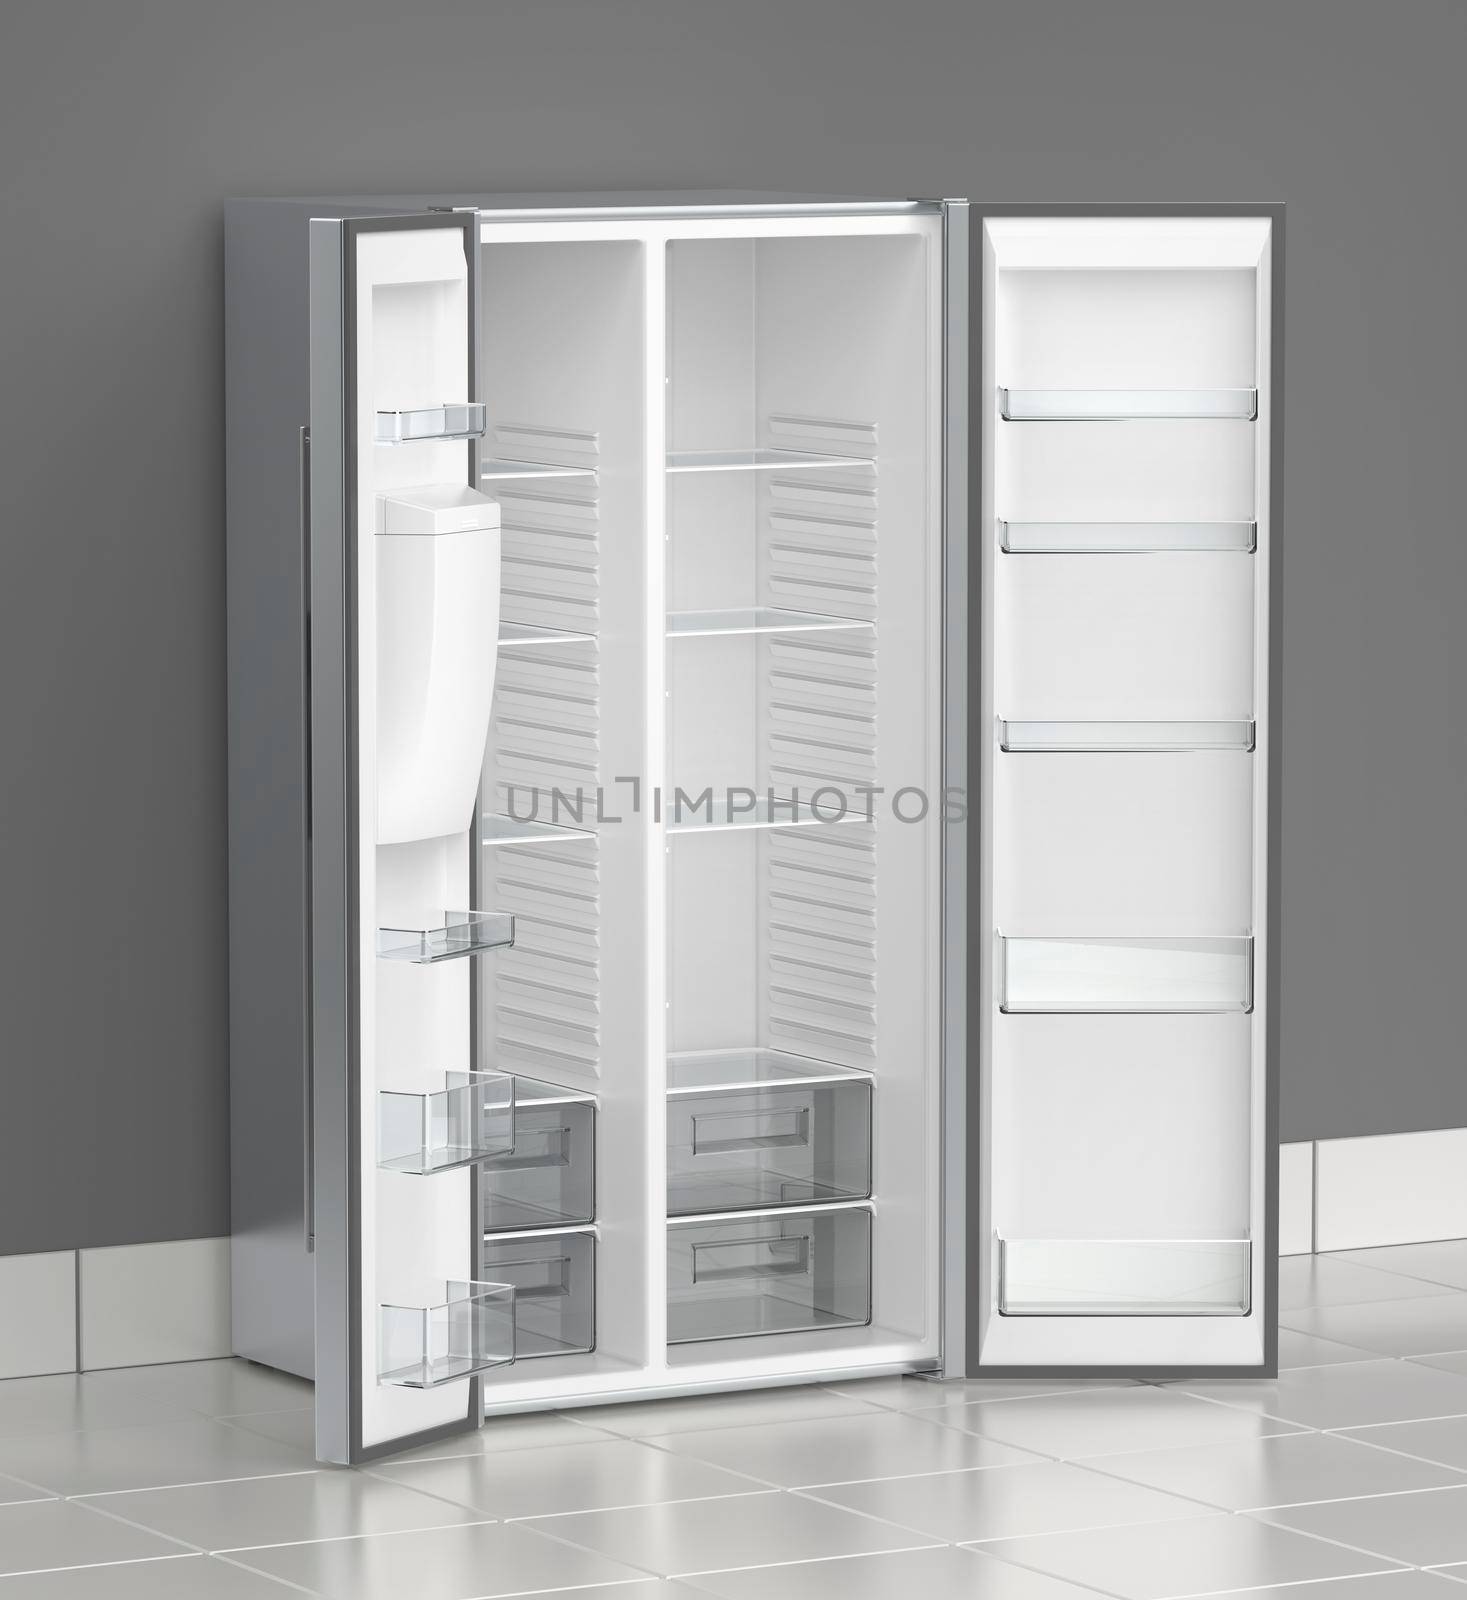 Empty big refrigerator by magraphics